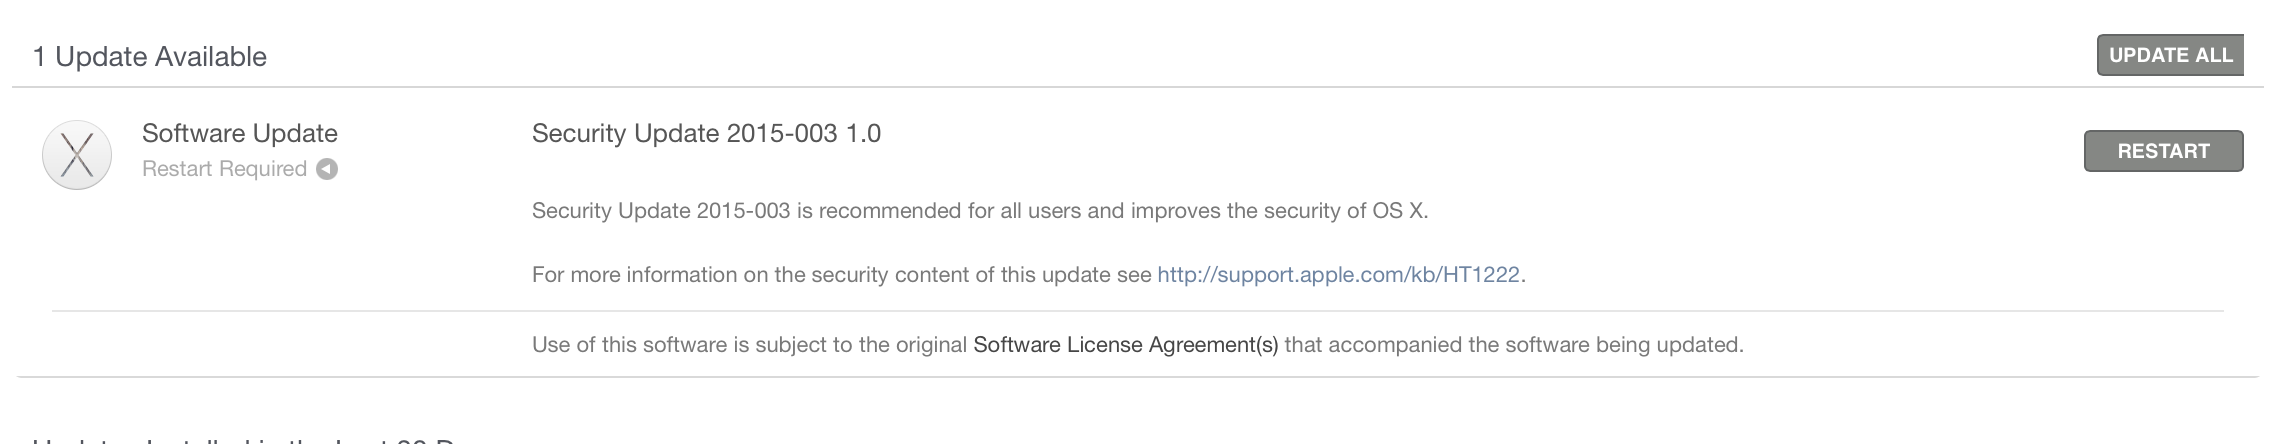 iphoto 9.6.1 will not update